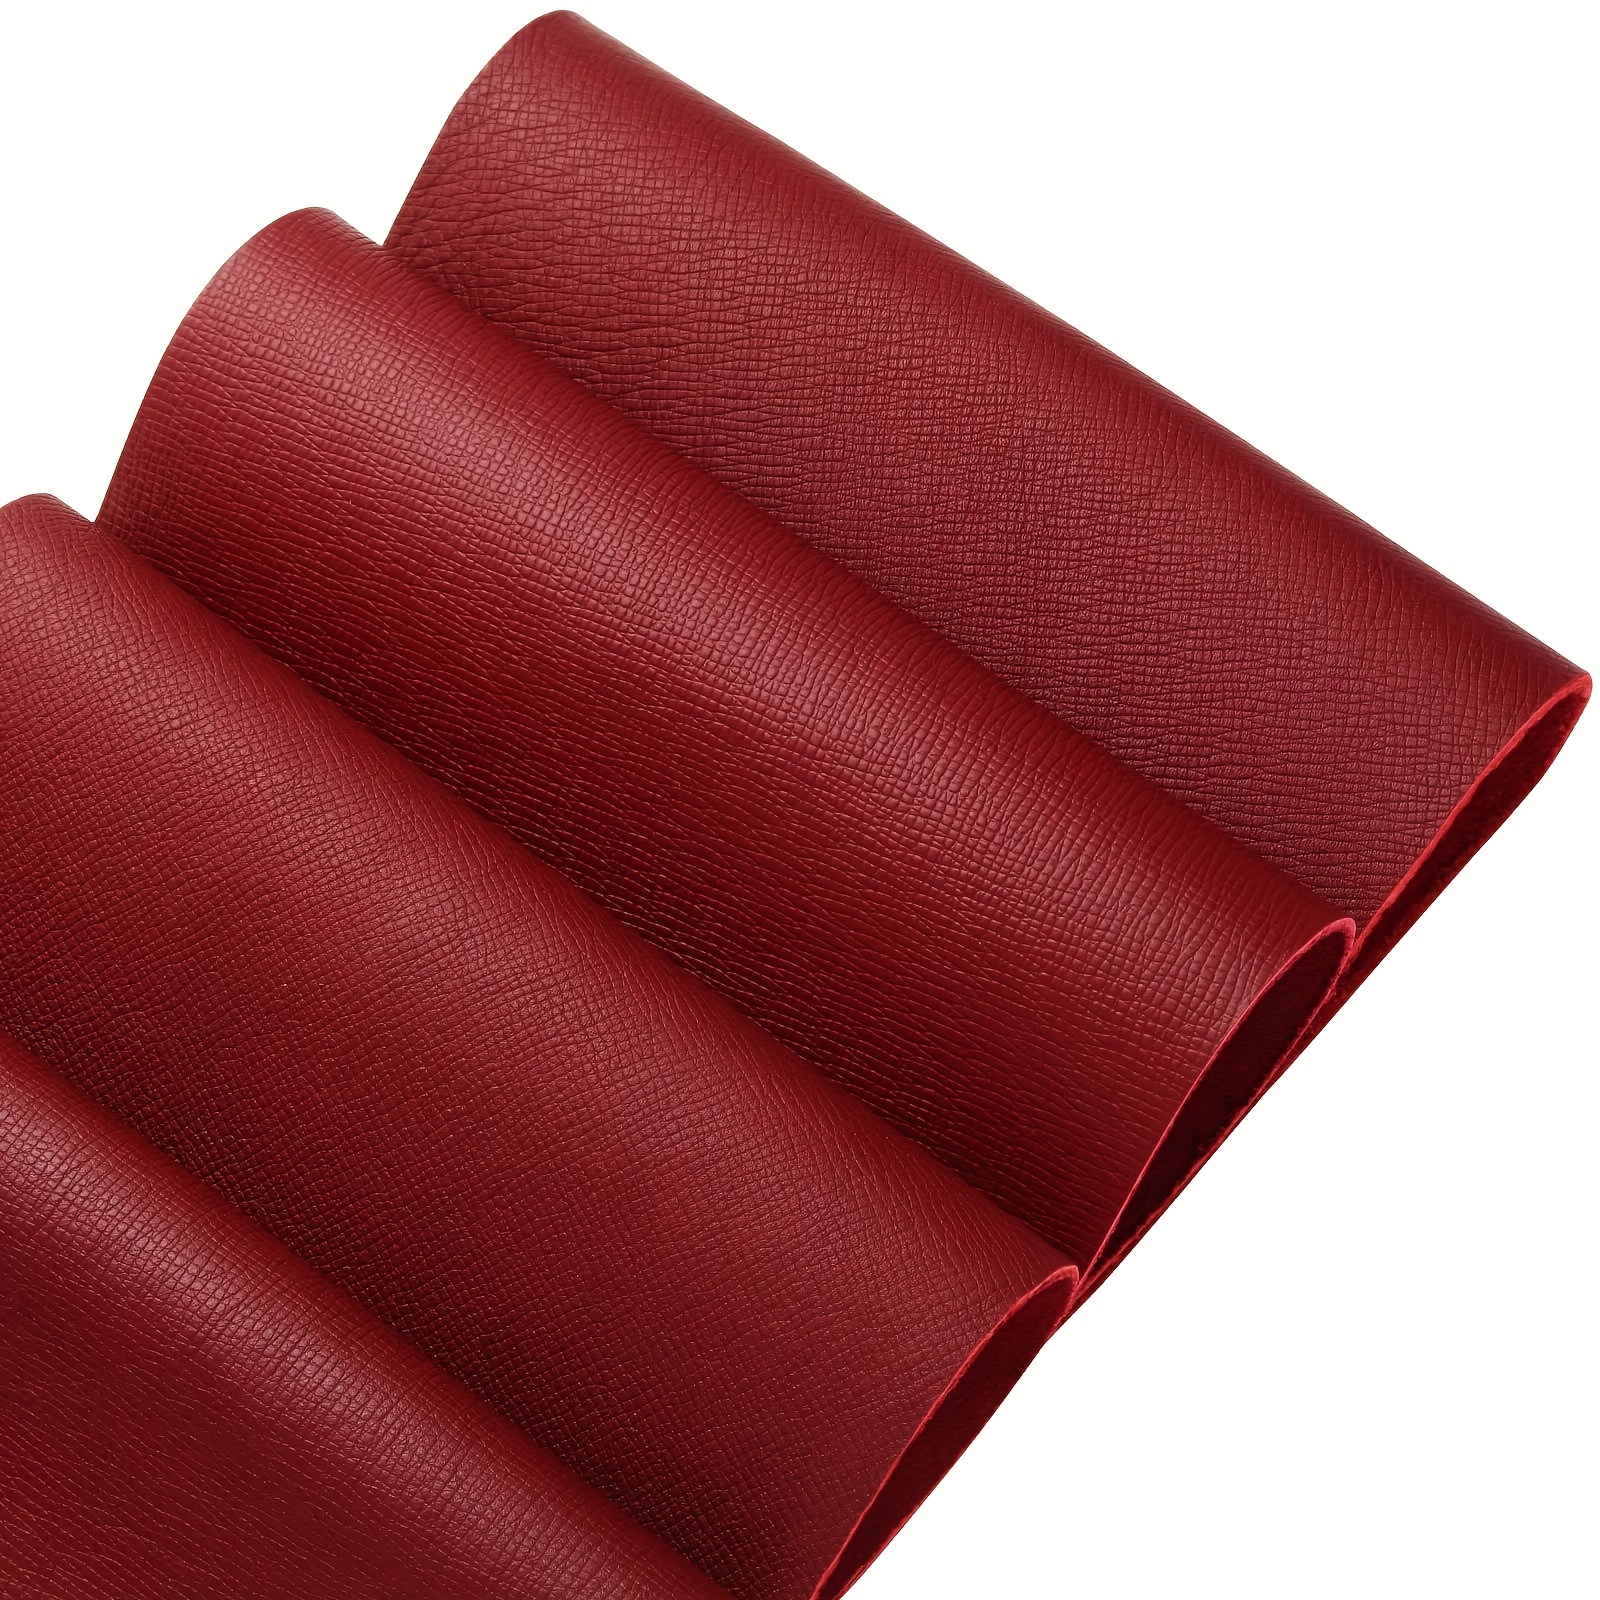 Genuine Leather Square for Crafting, Crazy Horse Leather Sheets Fabric Full  Grain Leather Pieces Thick Tooling Leather Material for Leather Work